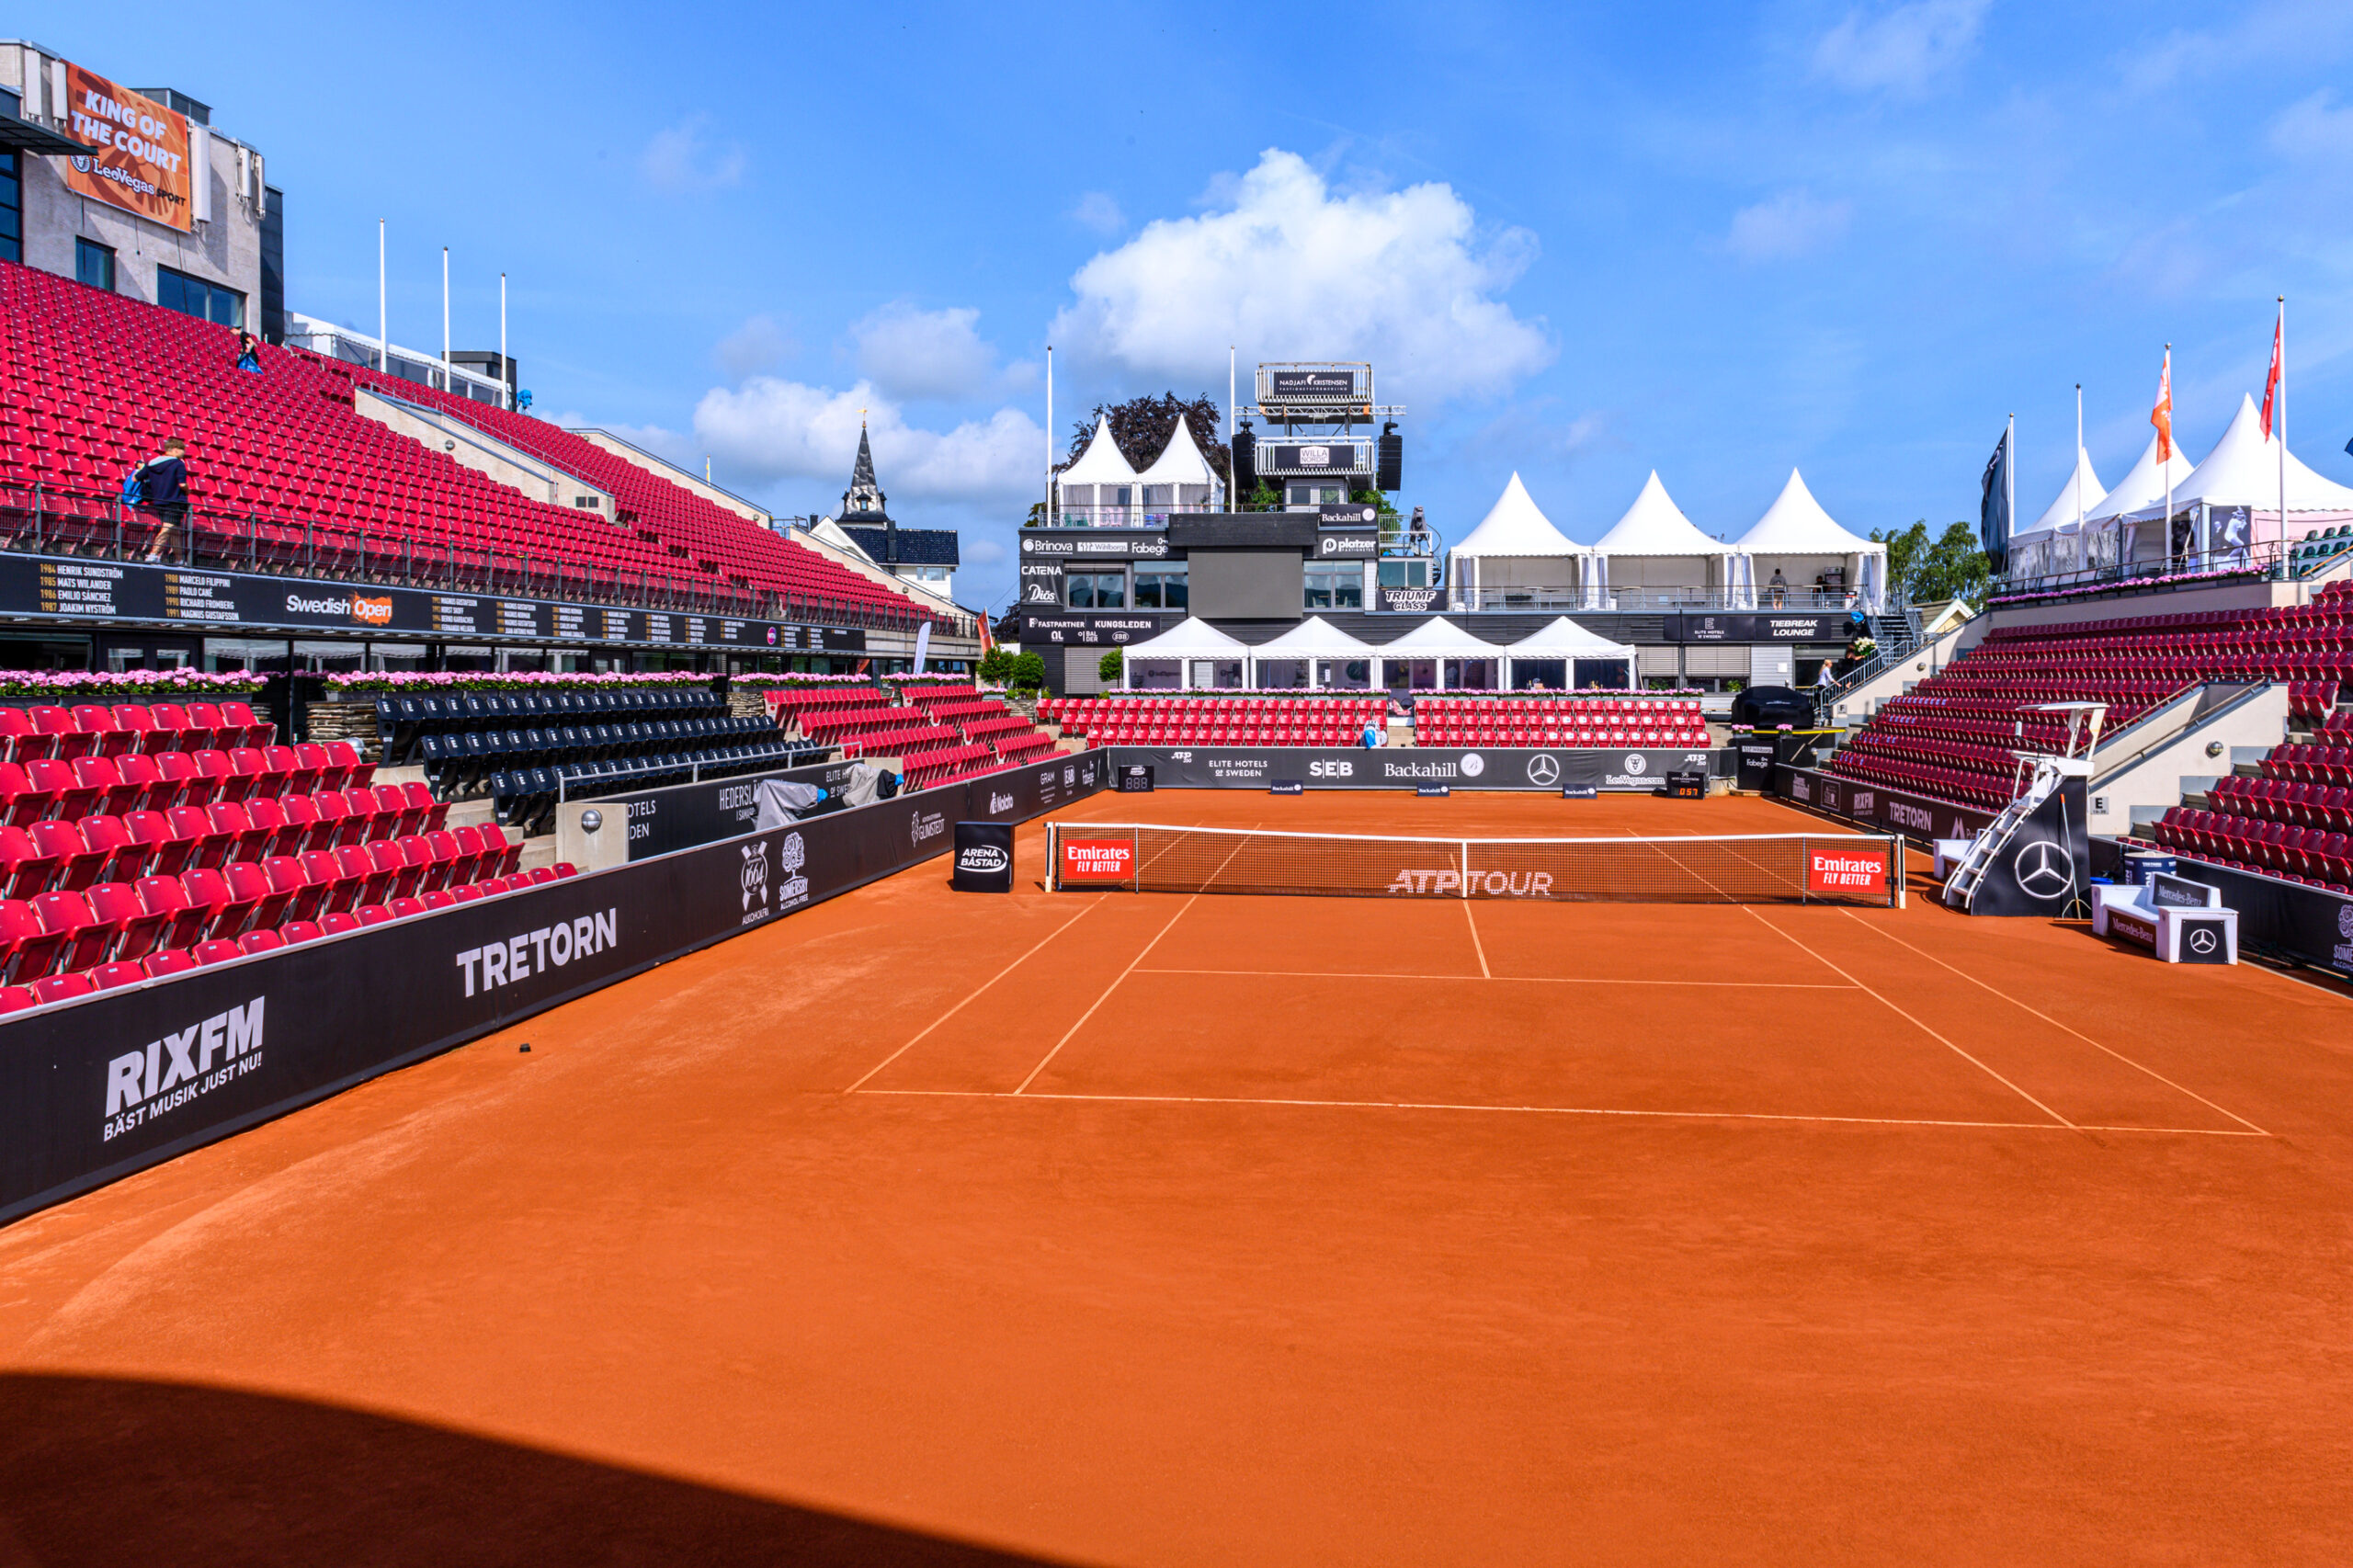 The Arena Nordea Open This is Båstad July 5-18 The highlight of summer!